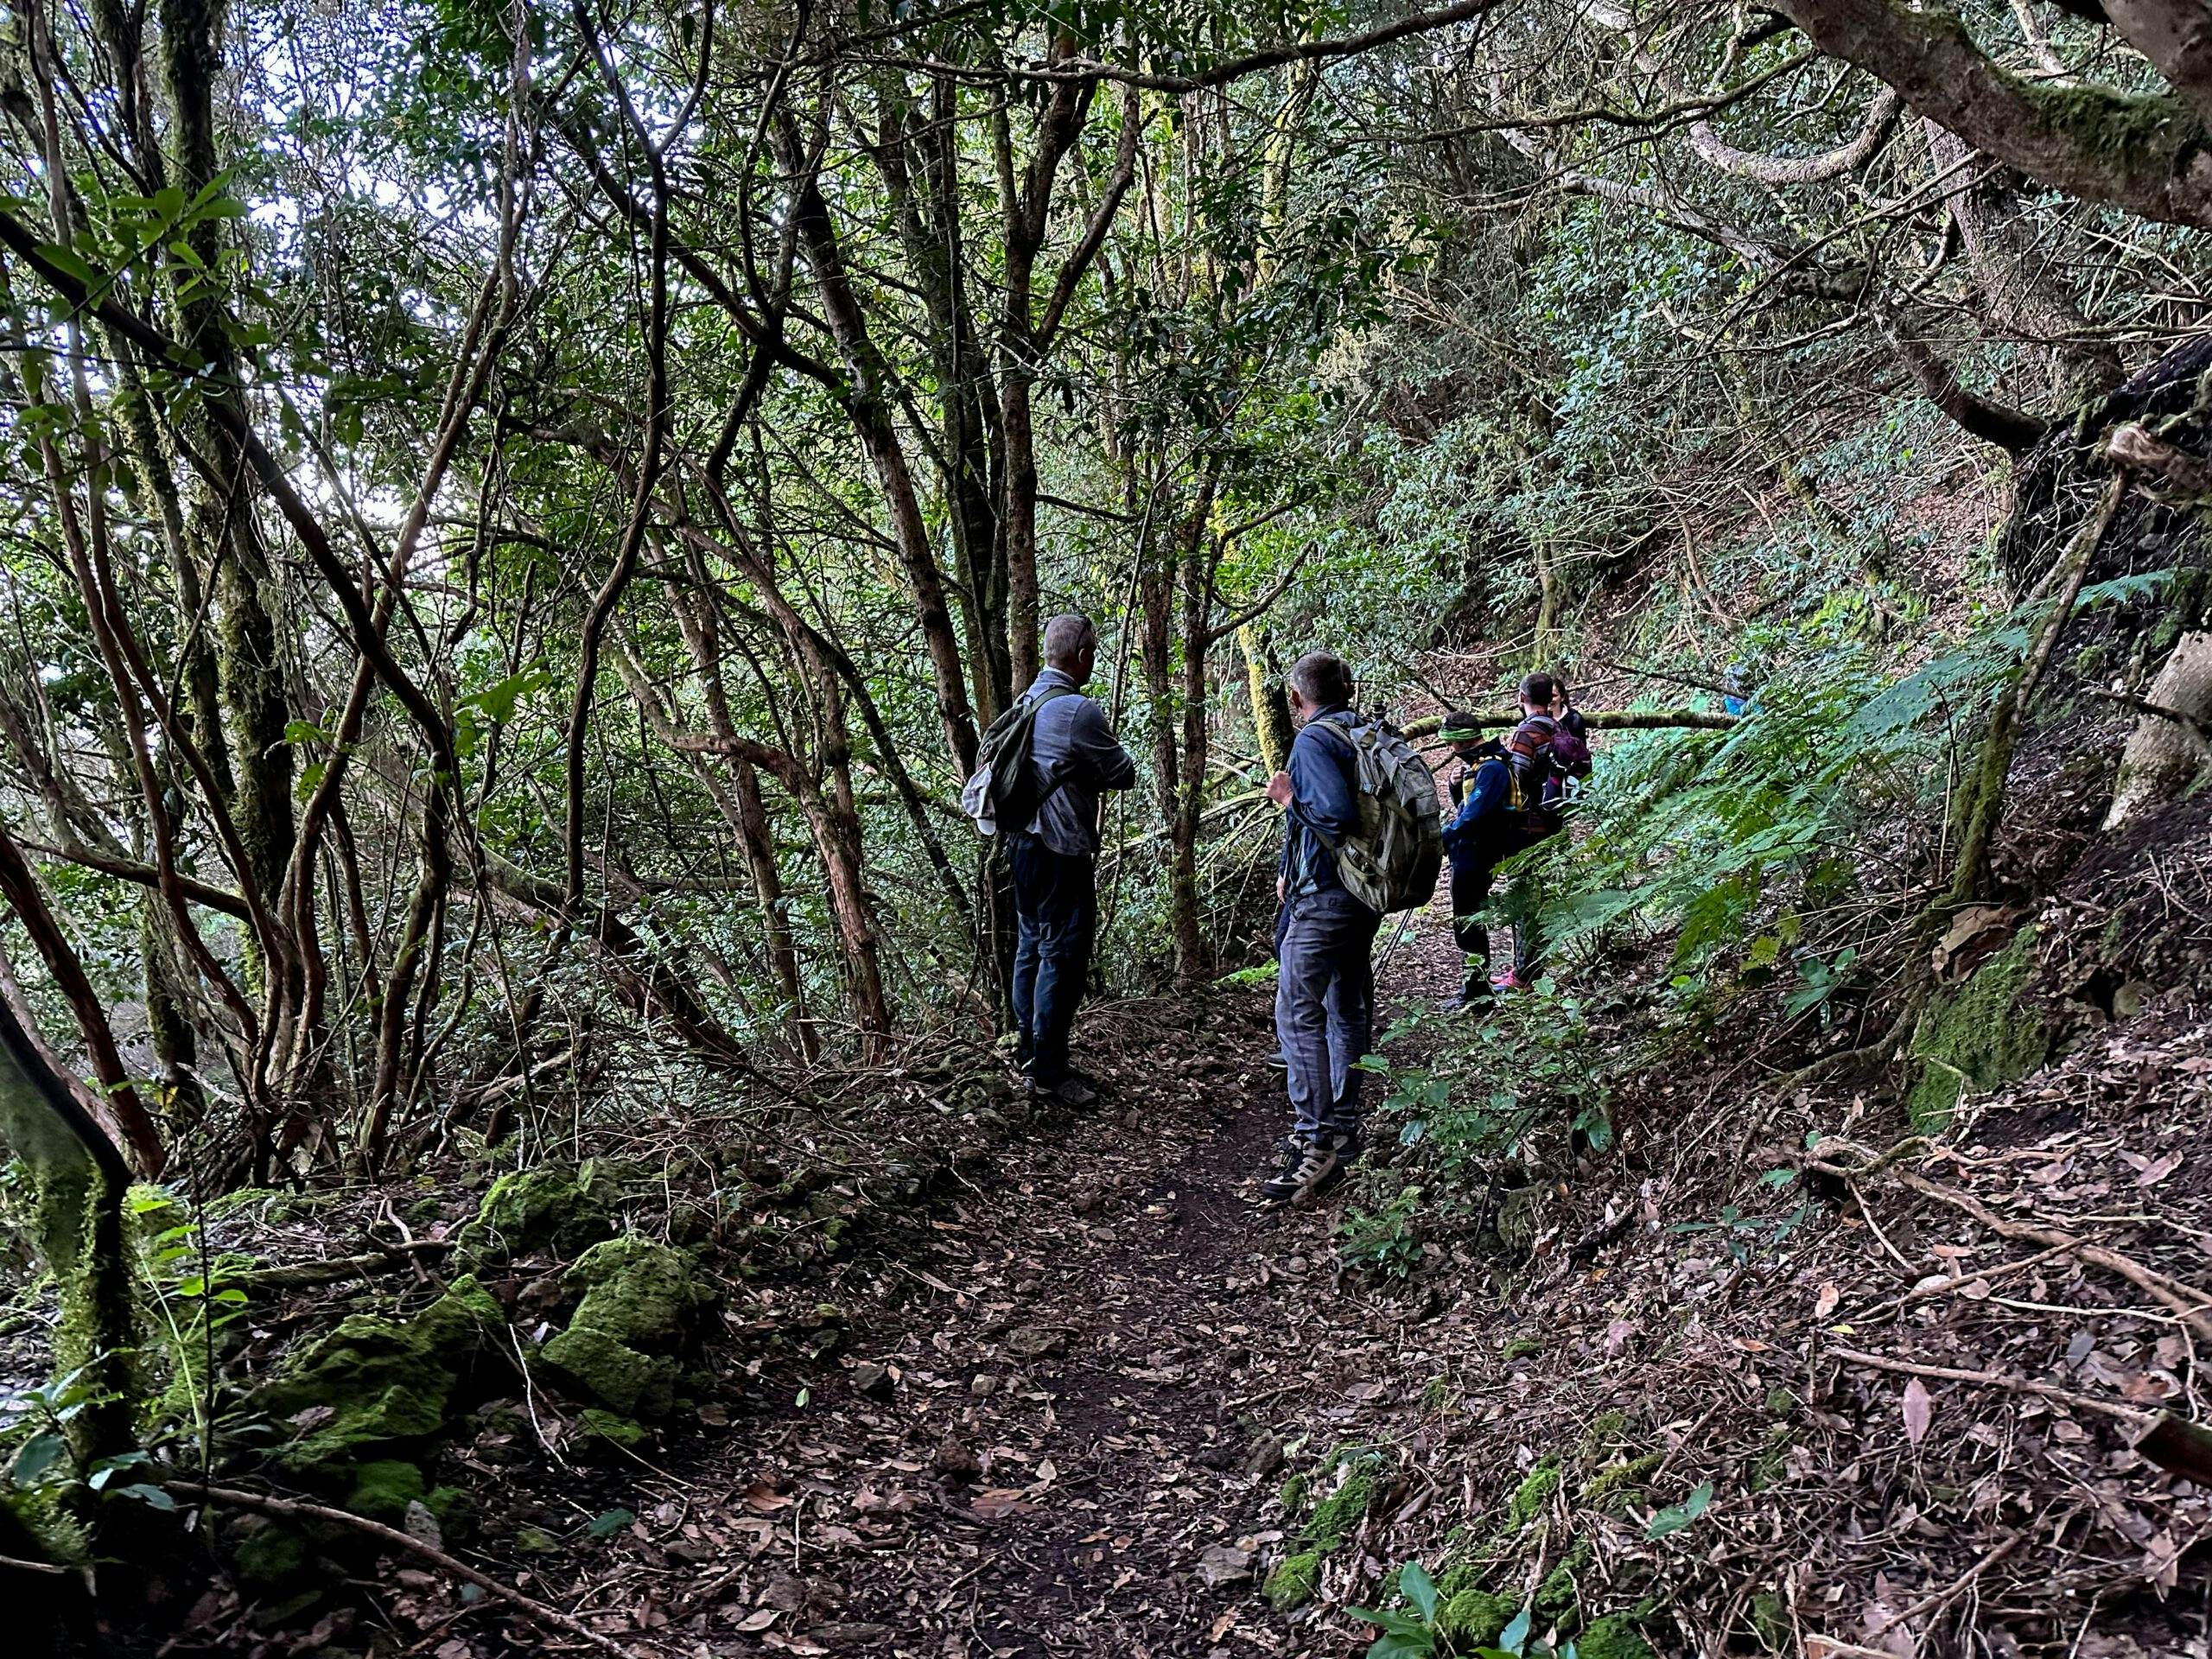 Hikers on the way down through the laurel forest to Taborno